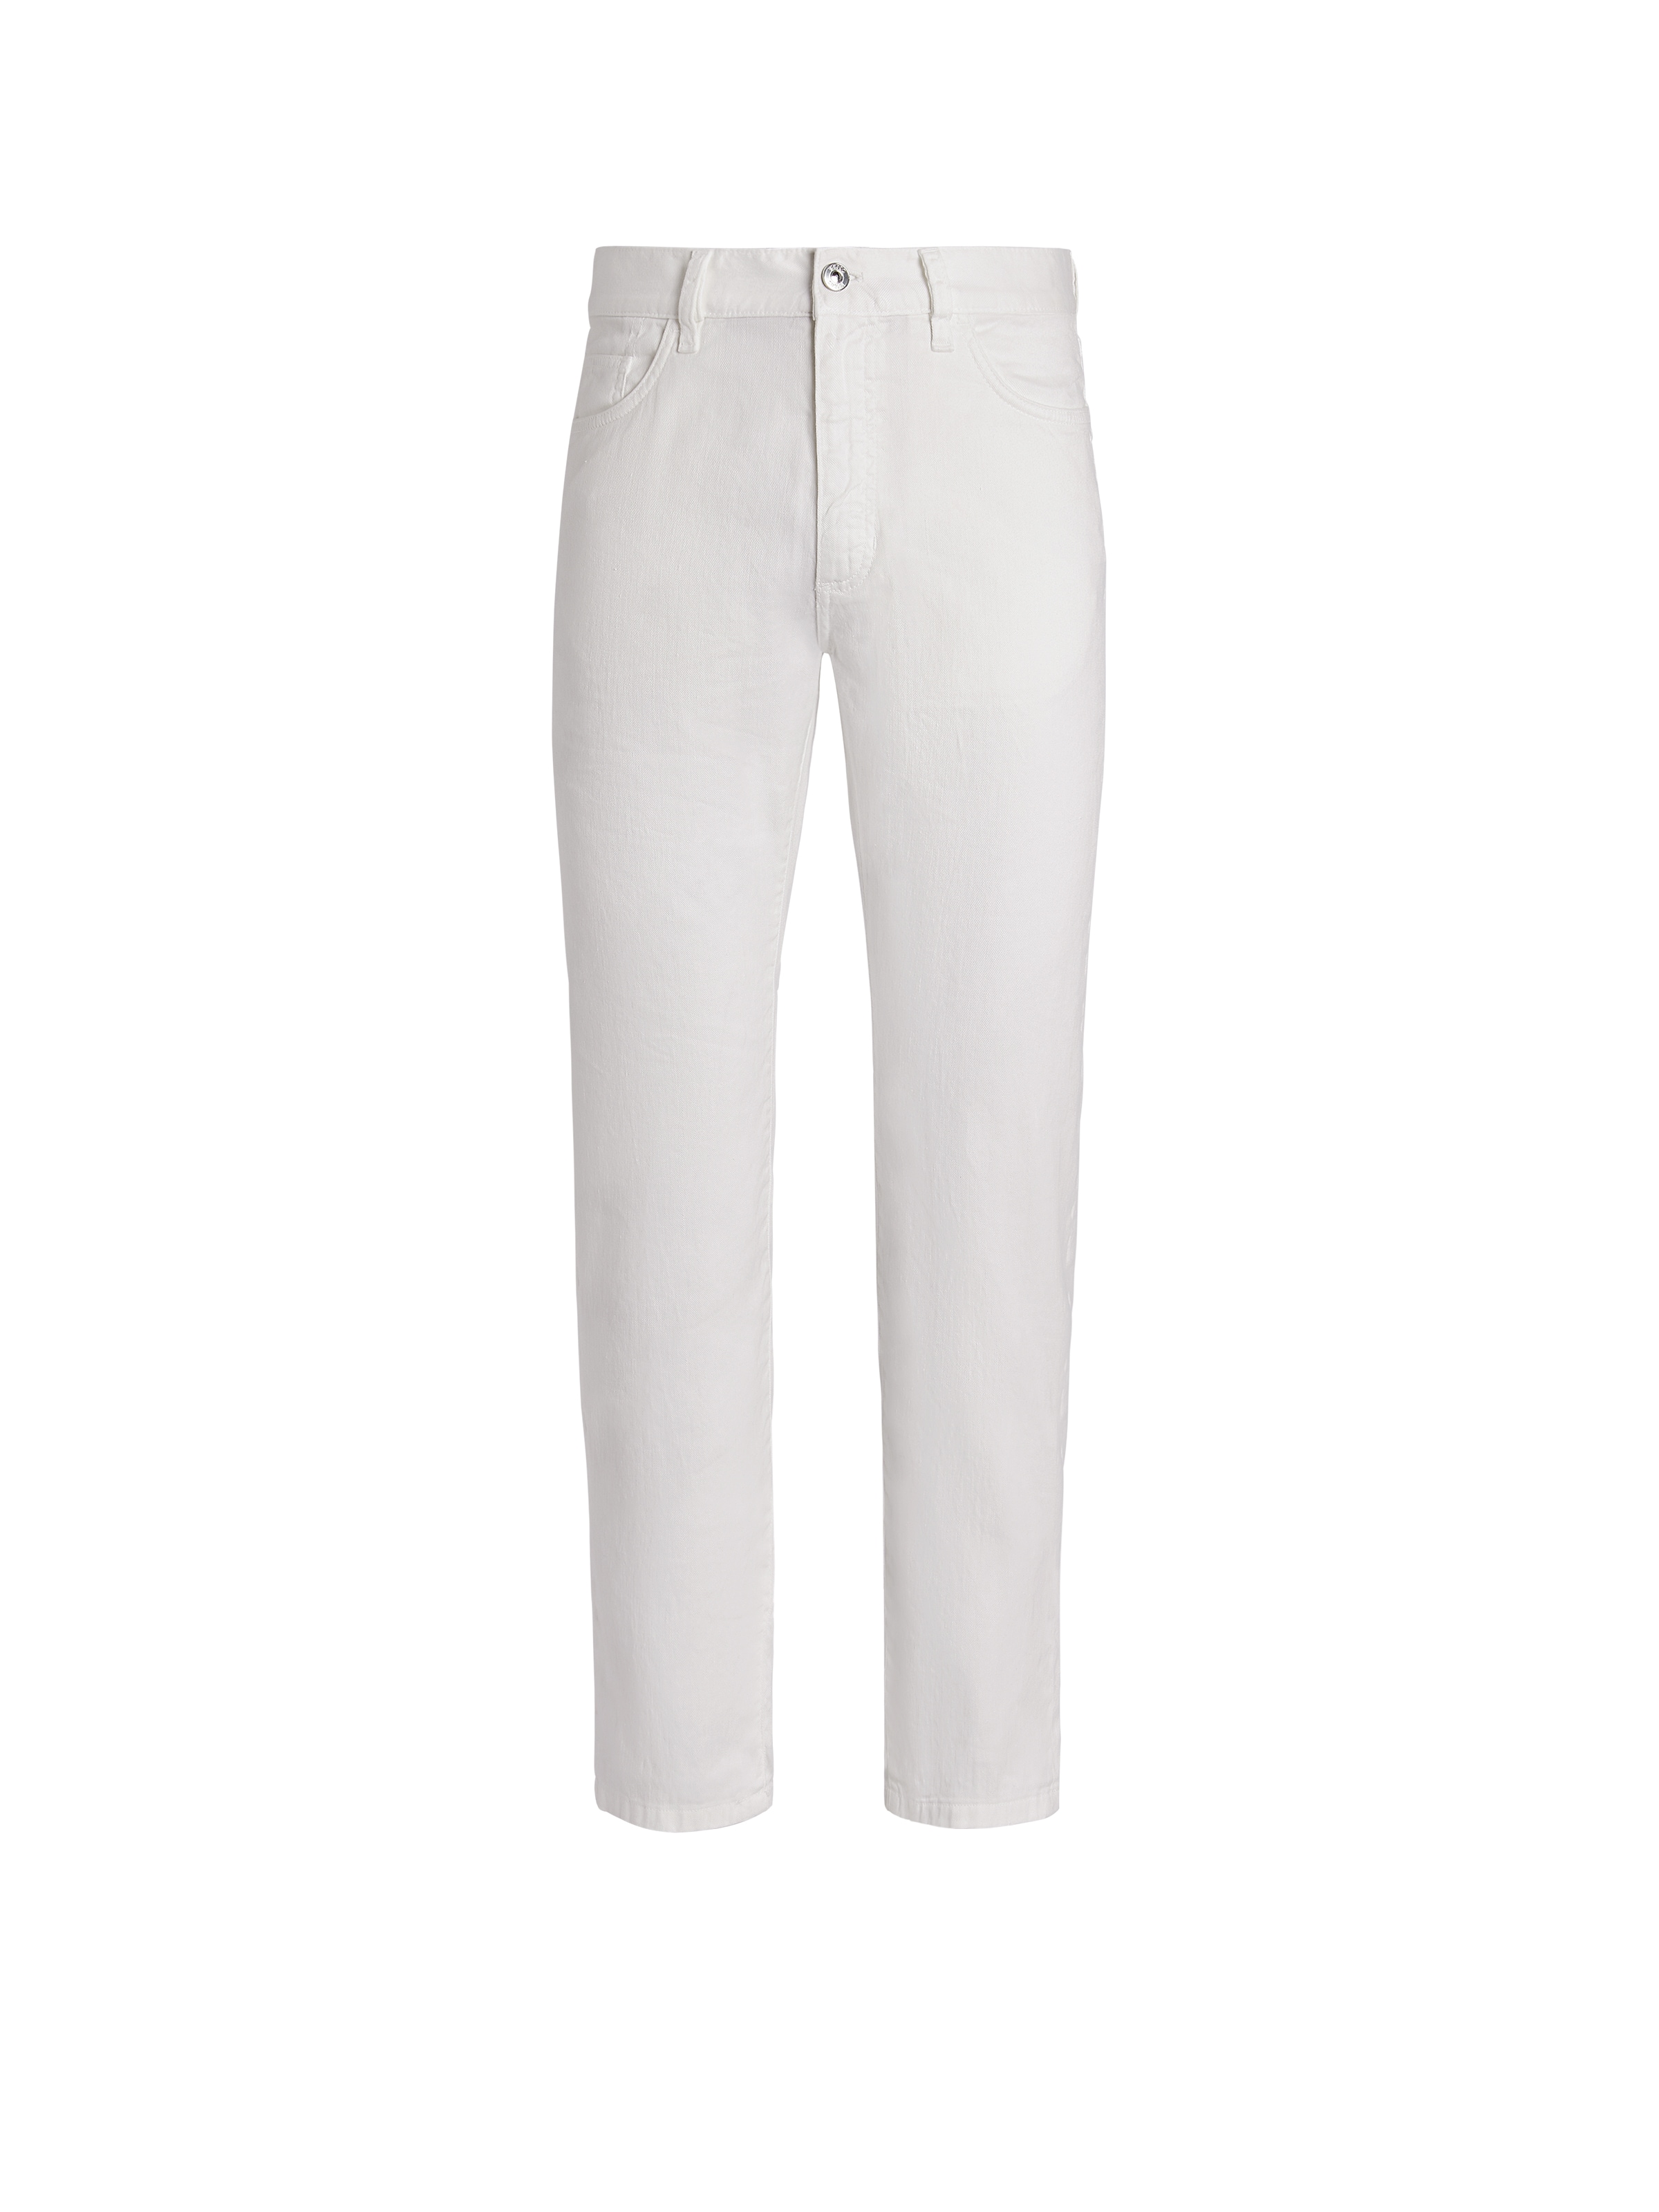 Zegna White Stretch Linen And Cotton Jeans